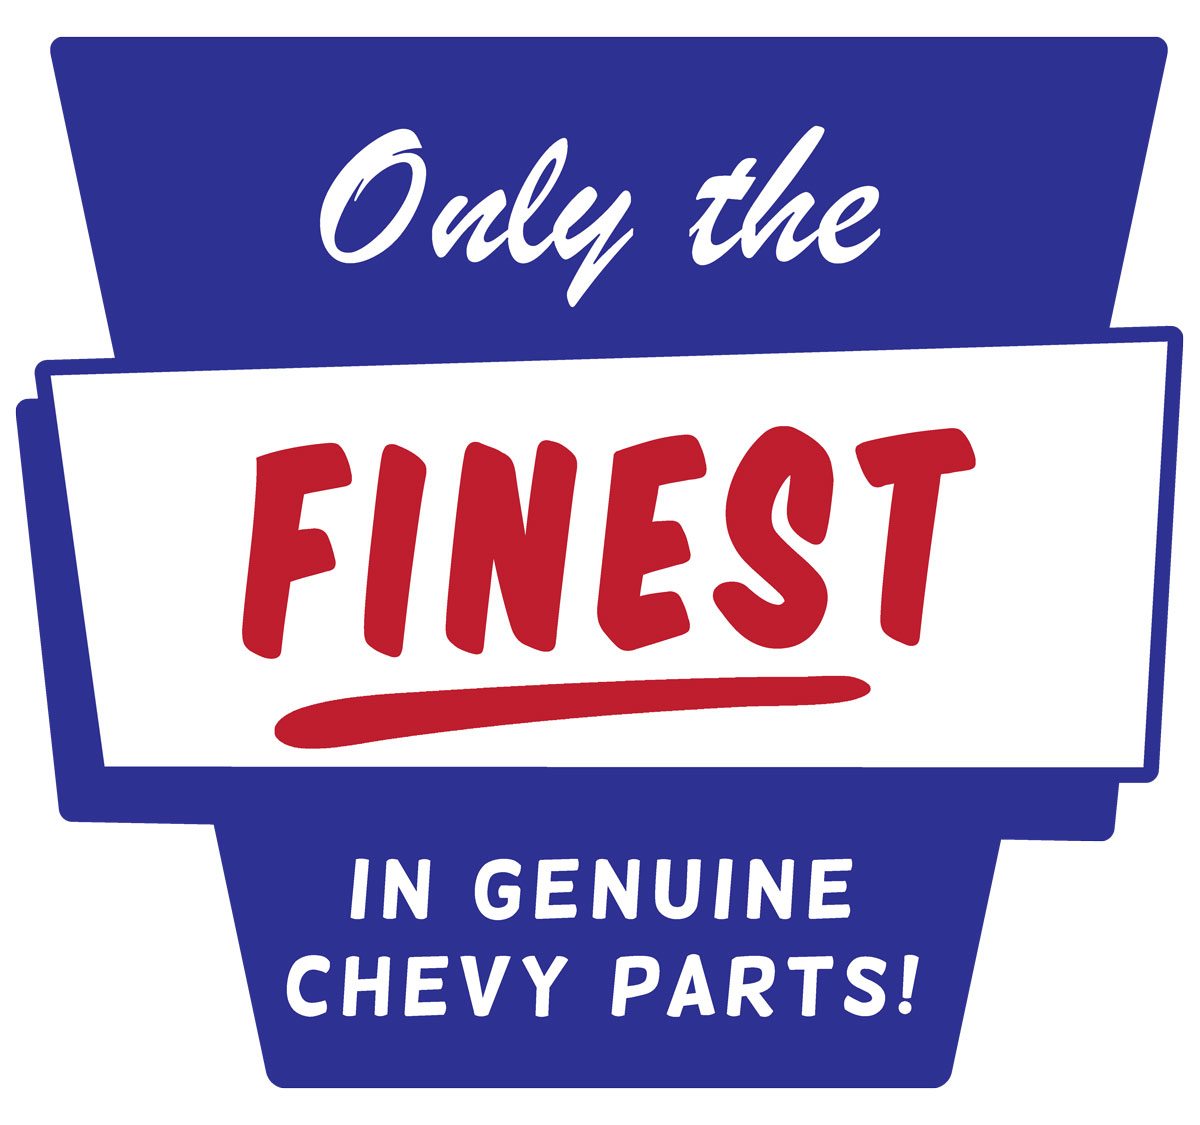 Only the Finest in Genuine Chevy Parts!